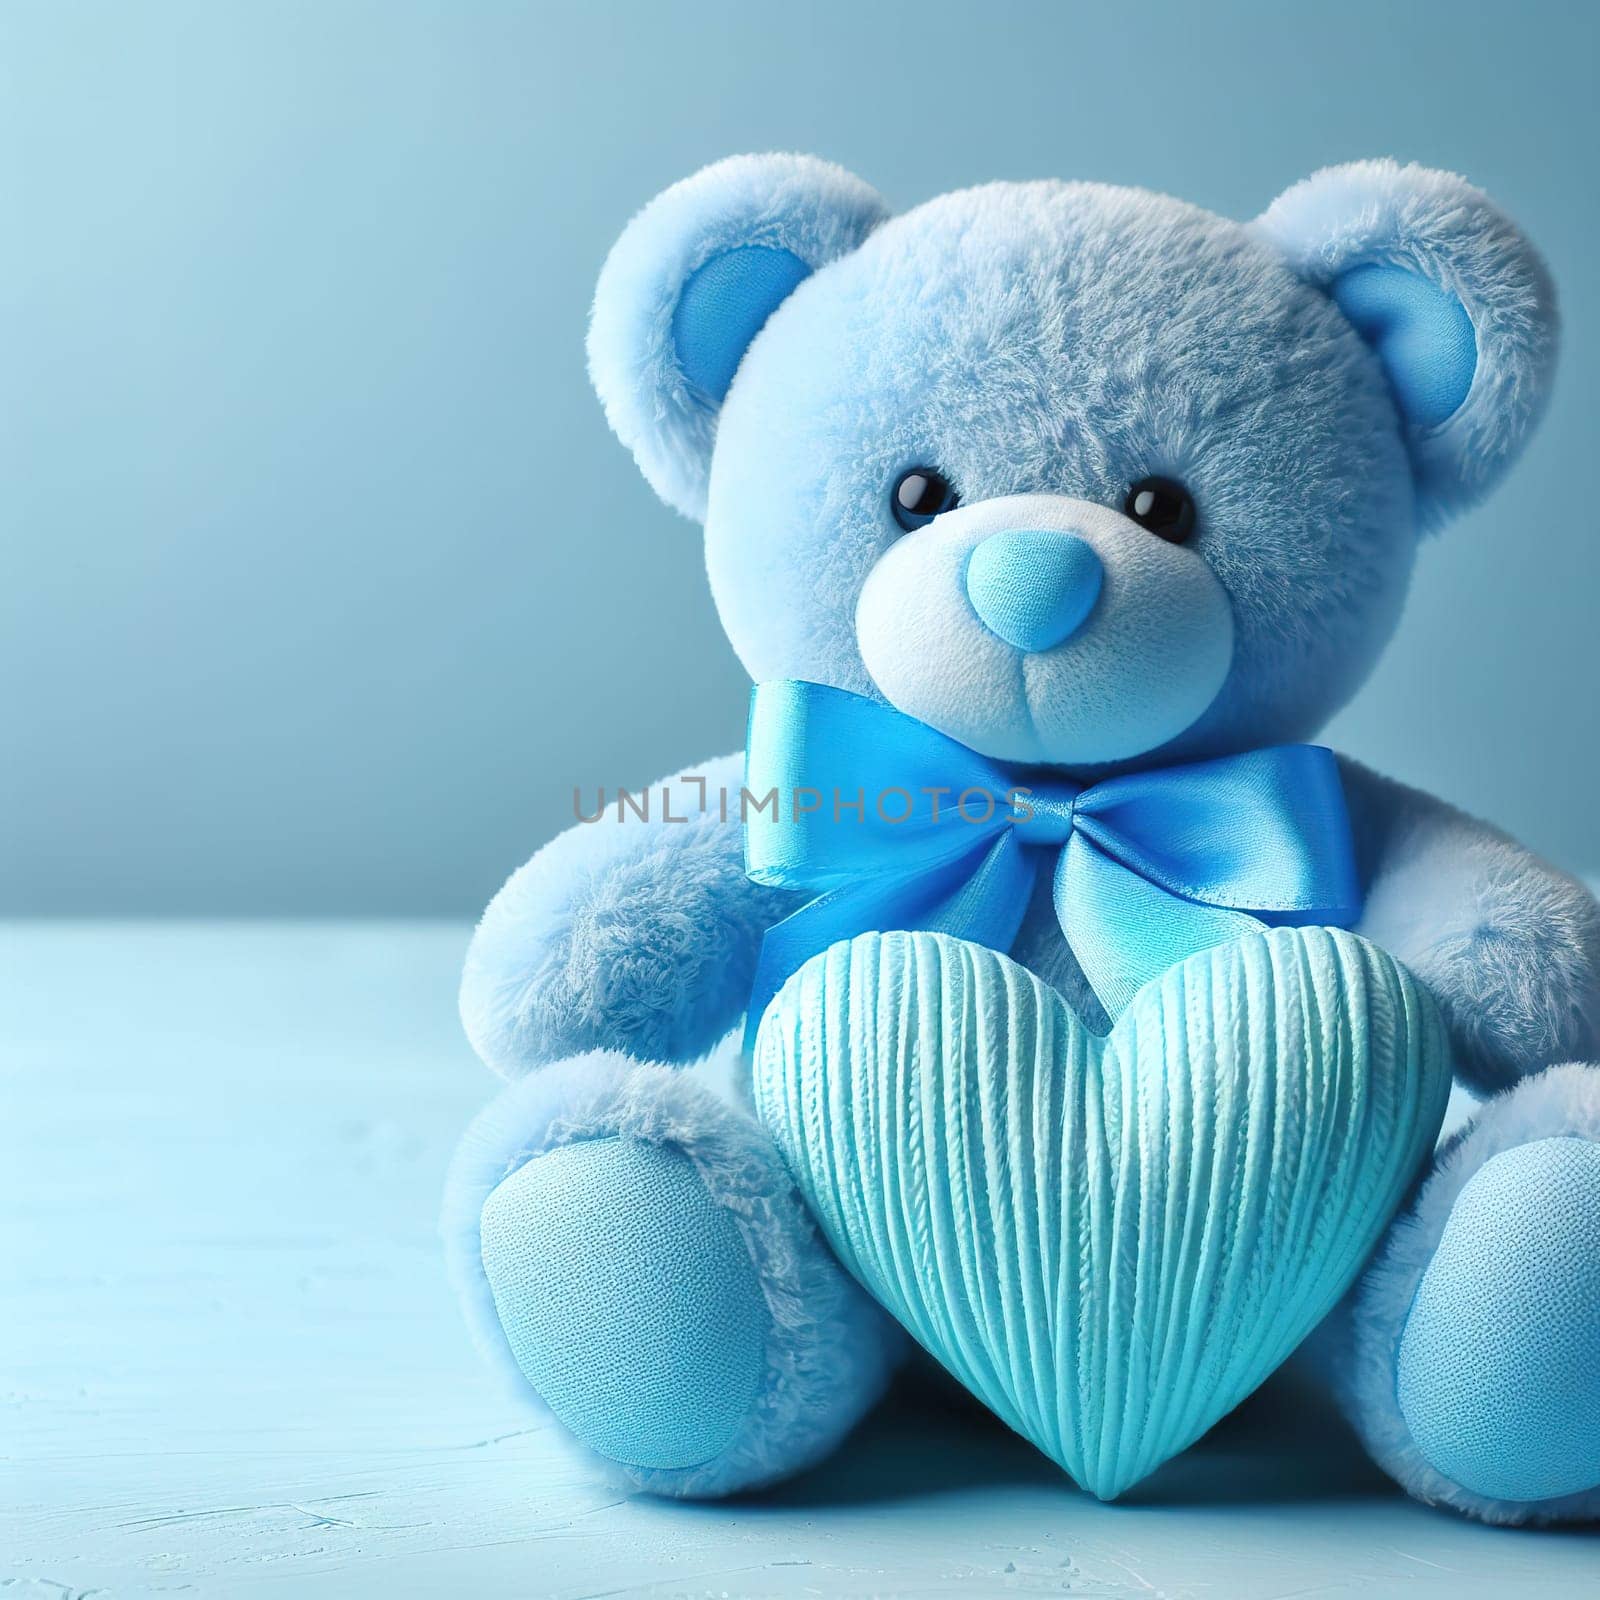 Teddy bear with heart, a good gift for Valentine's day by gordiza